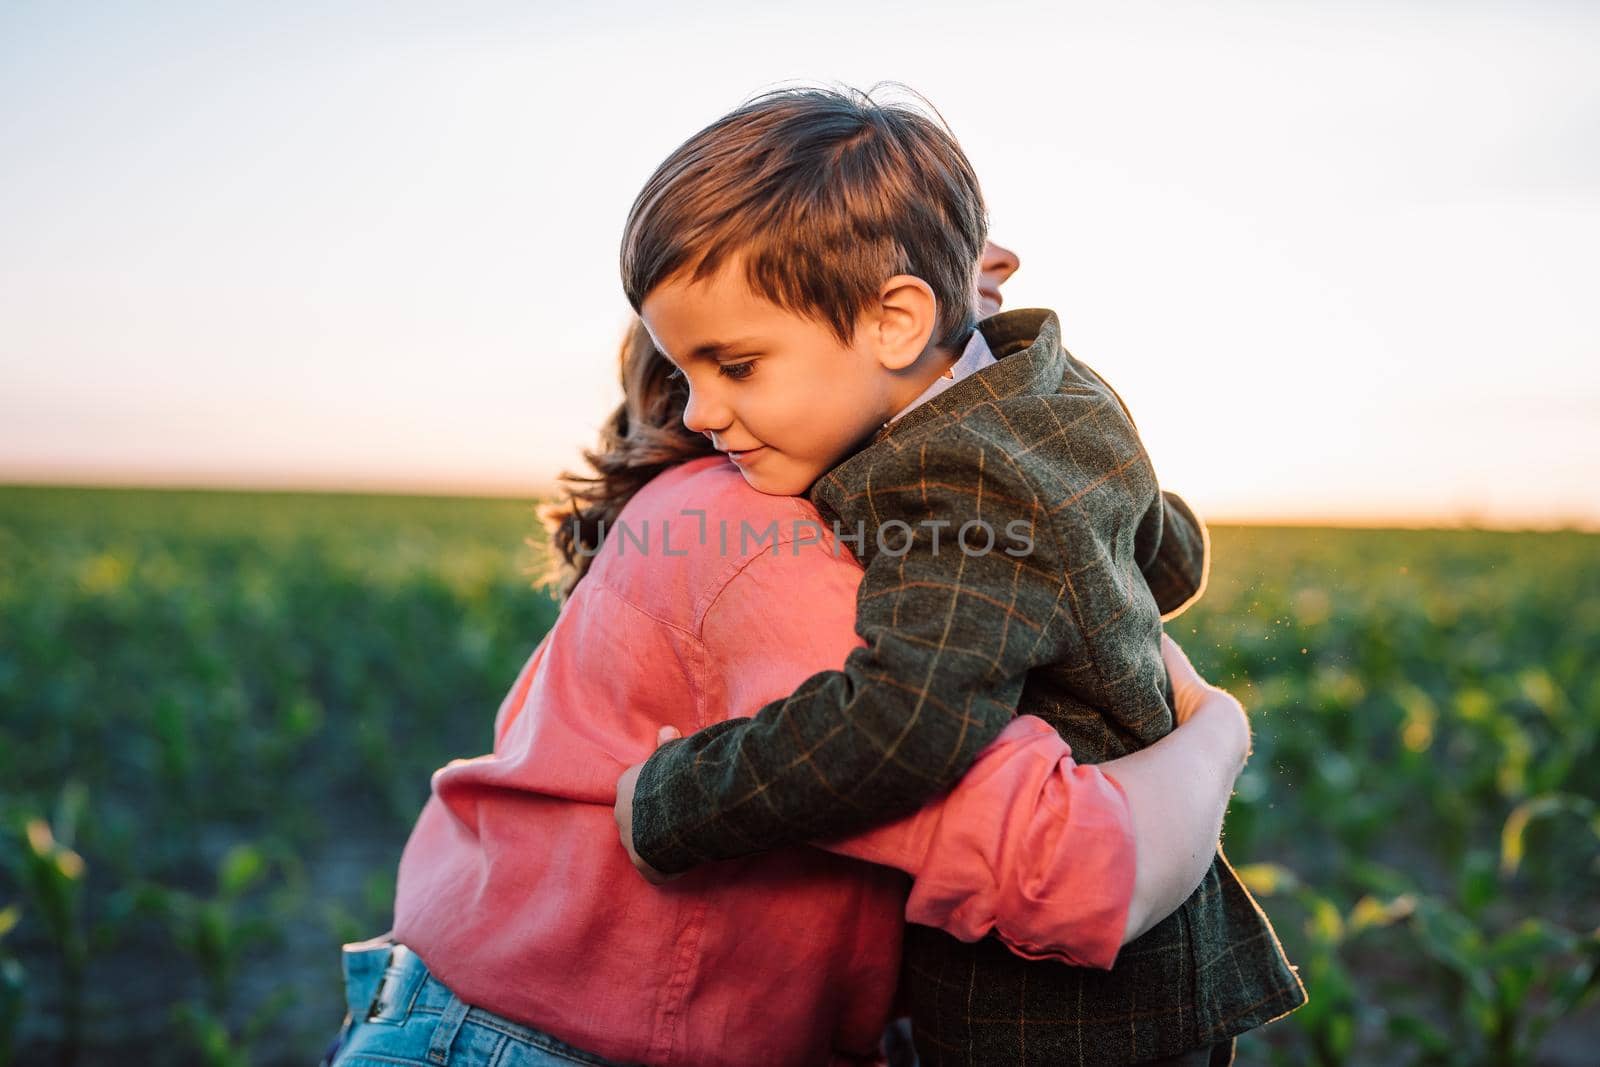 Loving smiling son hugs mom tightly. Tender family scene. Cute 3 year old ukrainian kid with mother. Parenthood, childhood, happiness, children wellbeing concept. by kristina_kokhanova